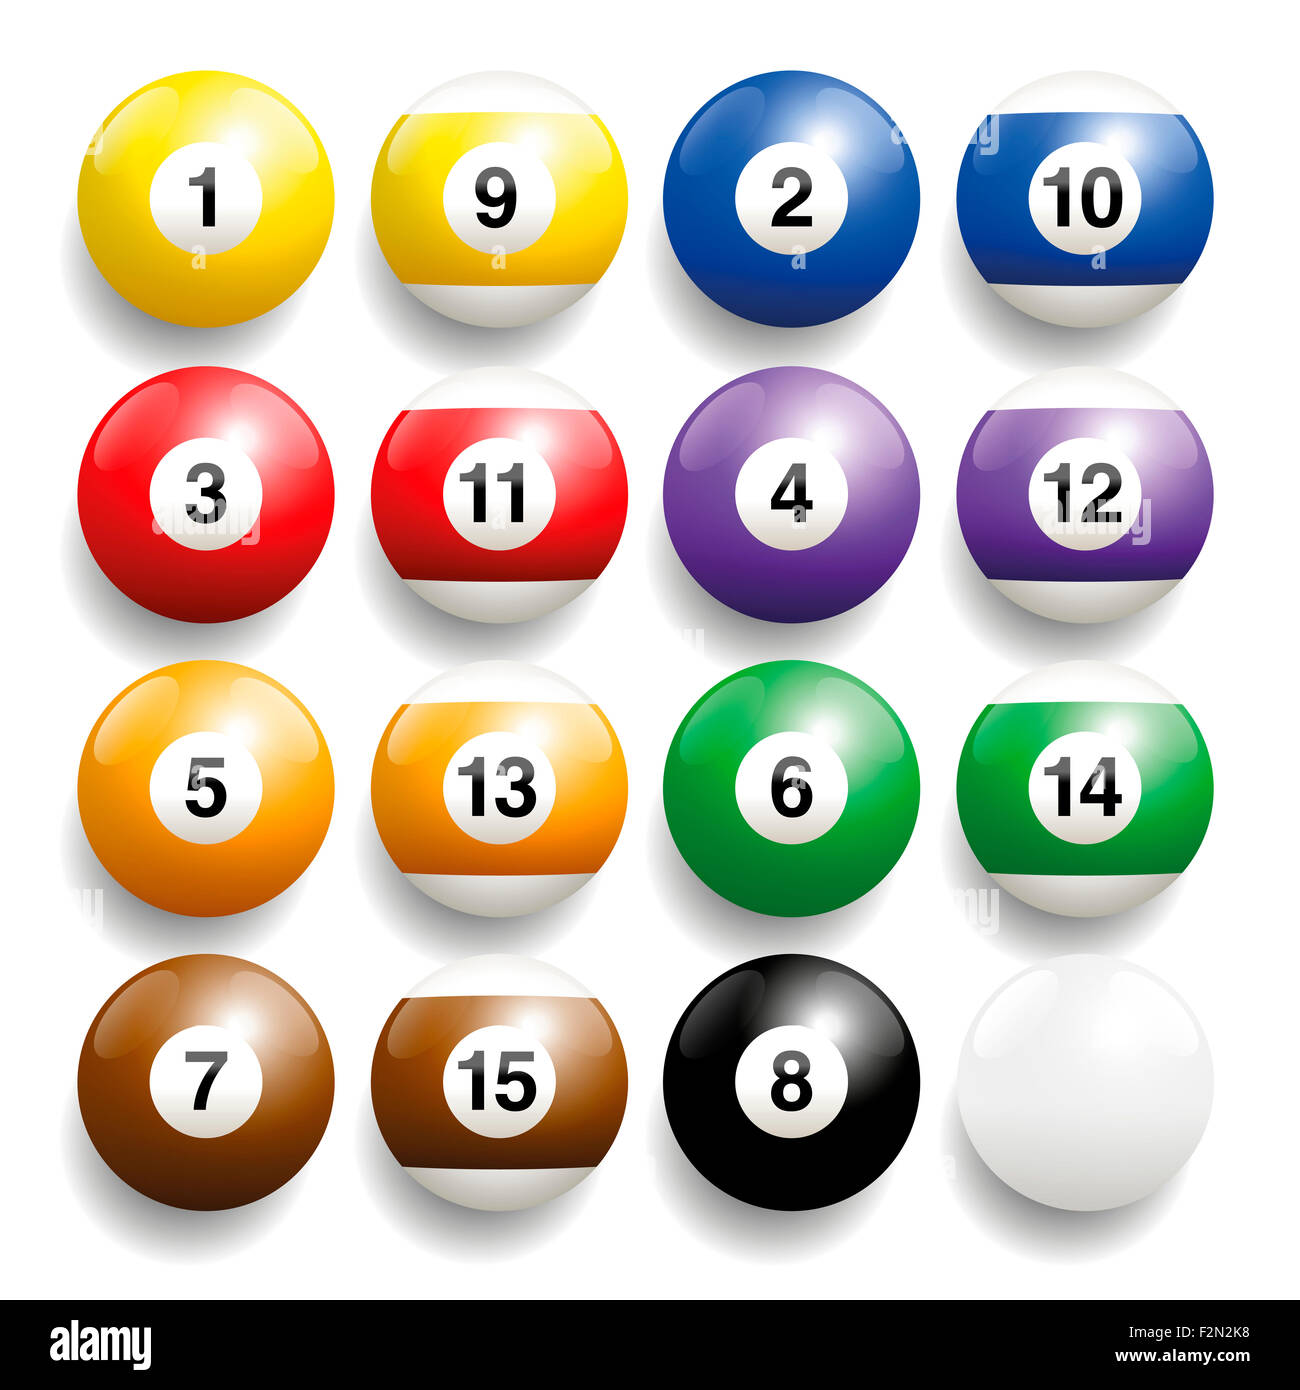 Billiard balls - commonly used colors. Three-dimensional and realistic looking, illustration on white background. Stock Photo